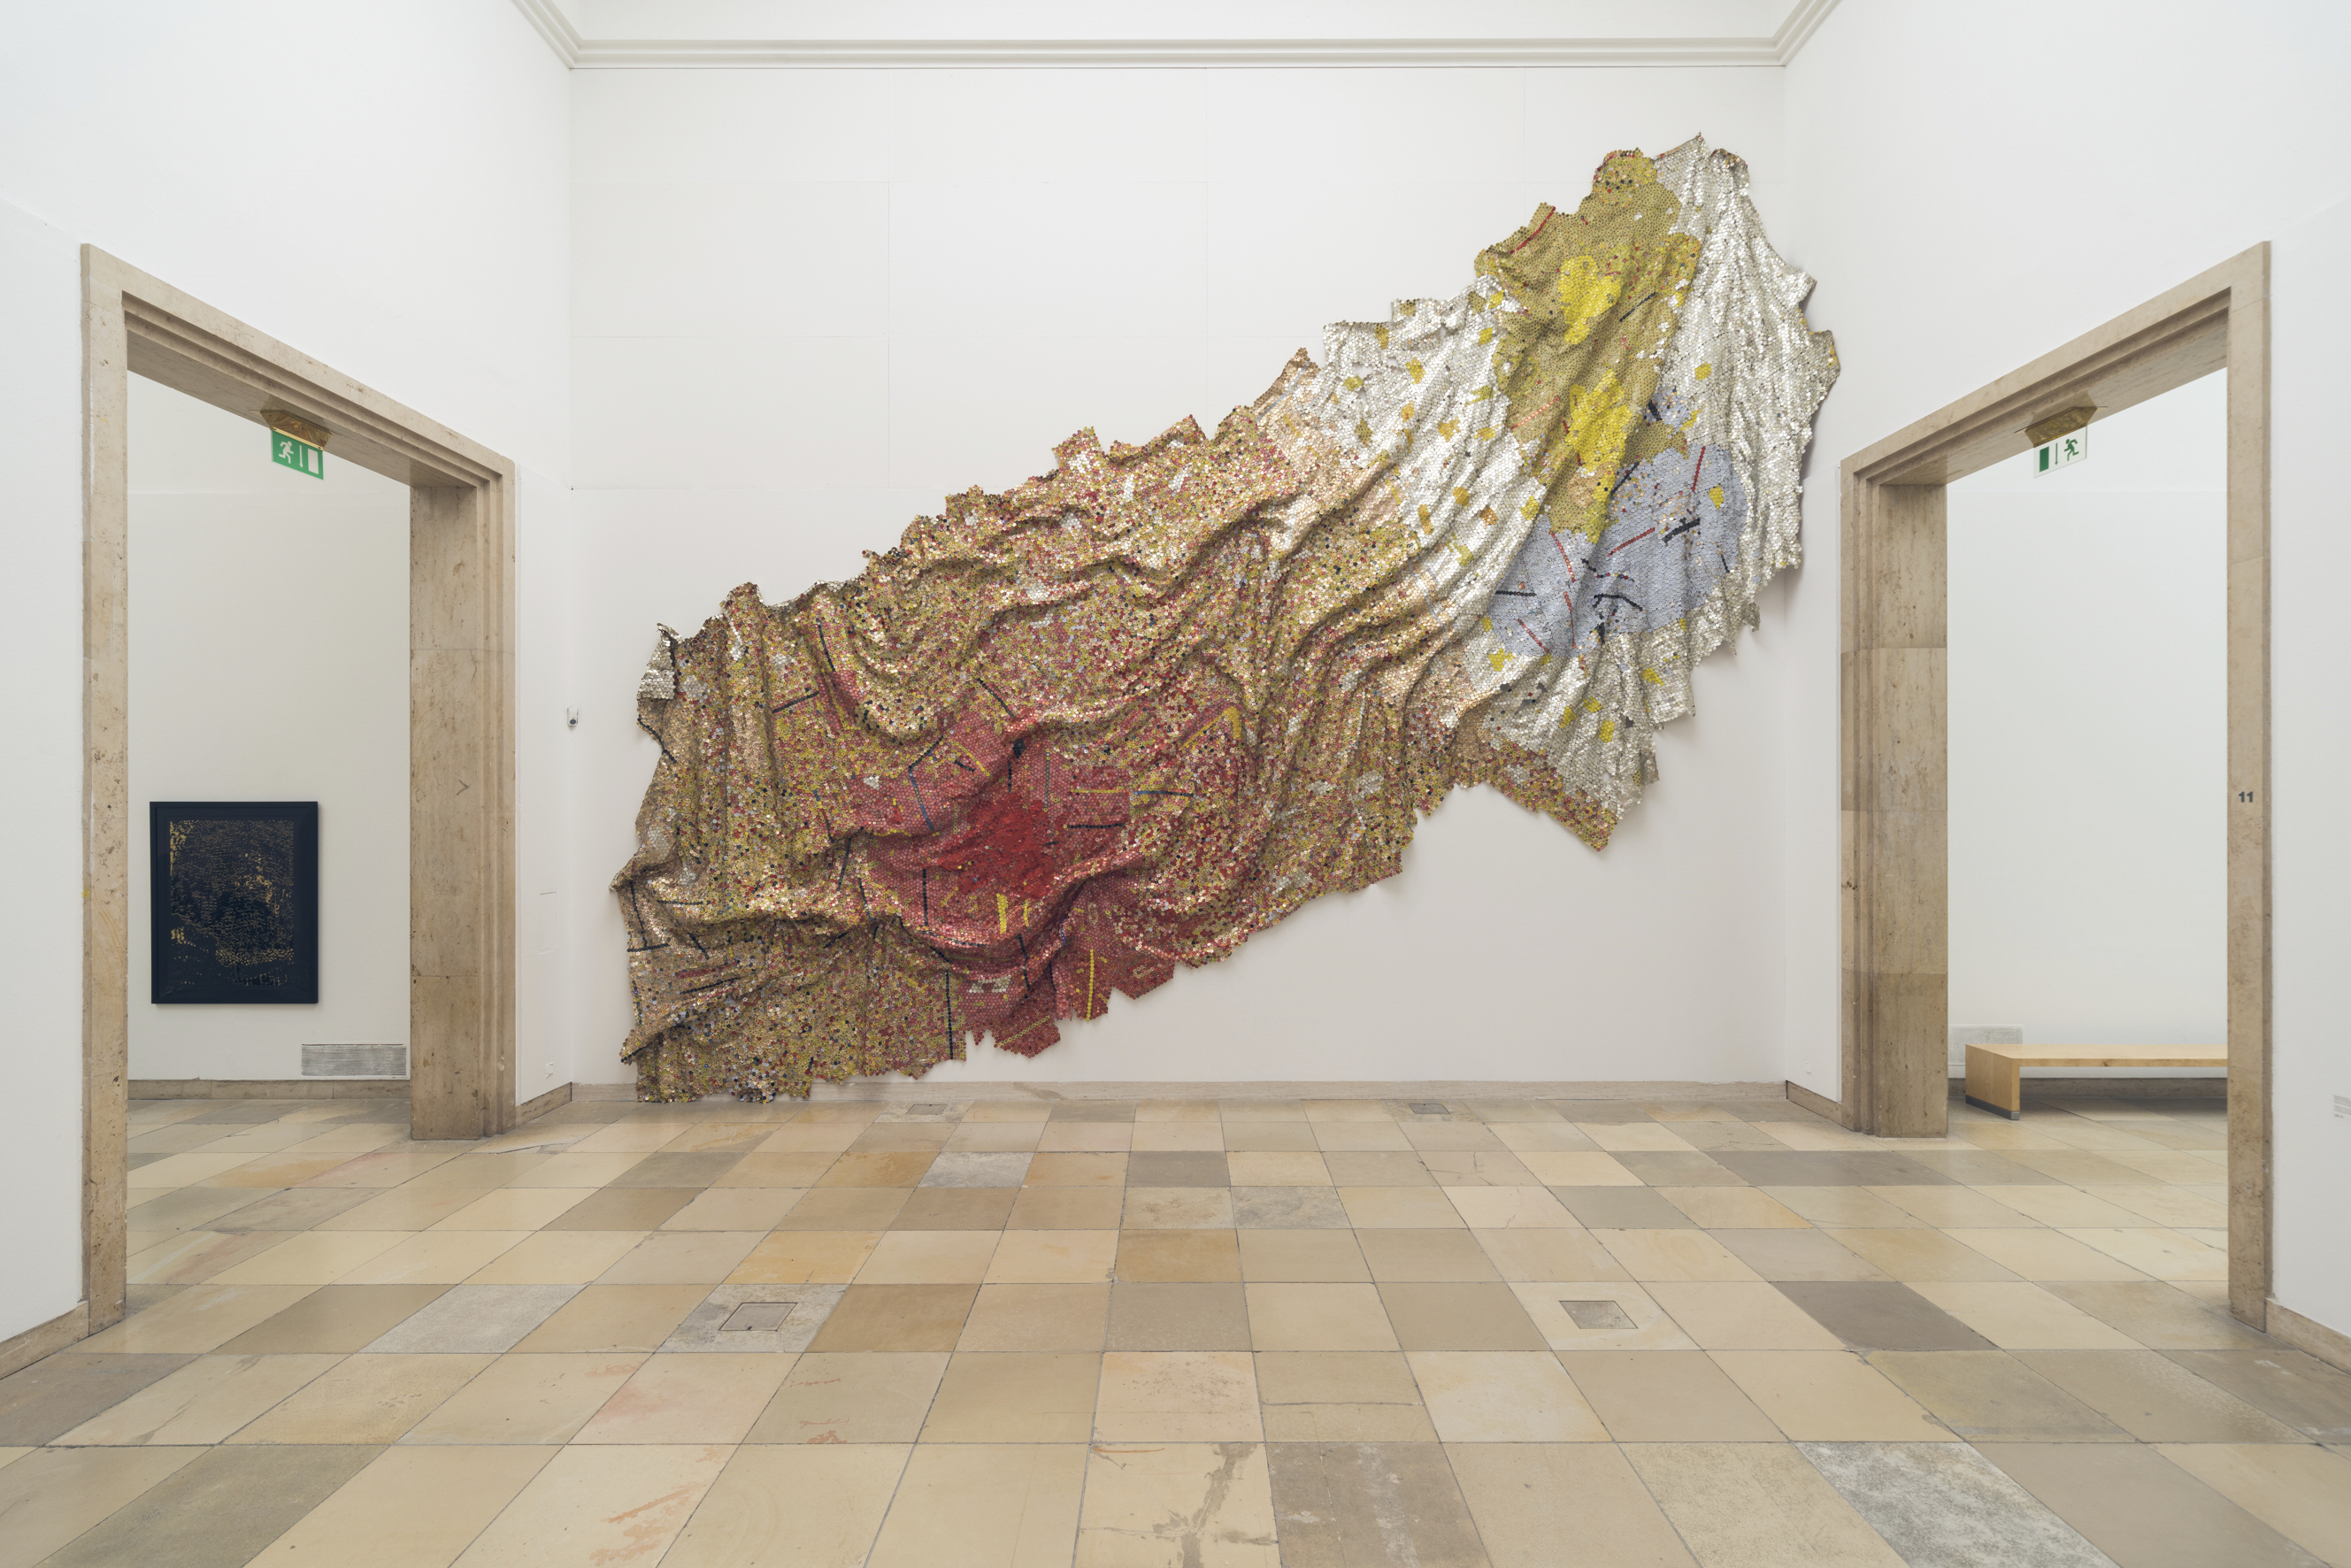 El Anatsui, "Gravity and Grace", 2010, aluminum and copper wire, 190 x 441 inches (482 x 1120cm). Collection of the artist, Nsukka, Nigeria, courtesy Jack Shainman Gallery, New York